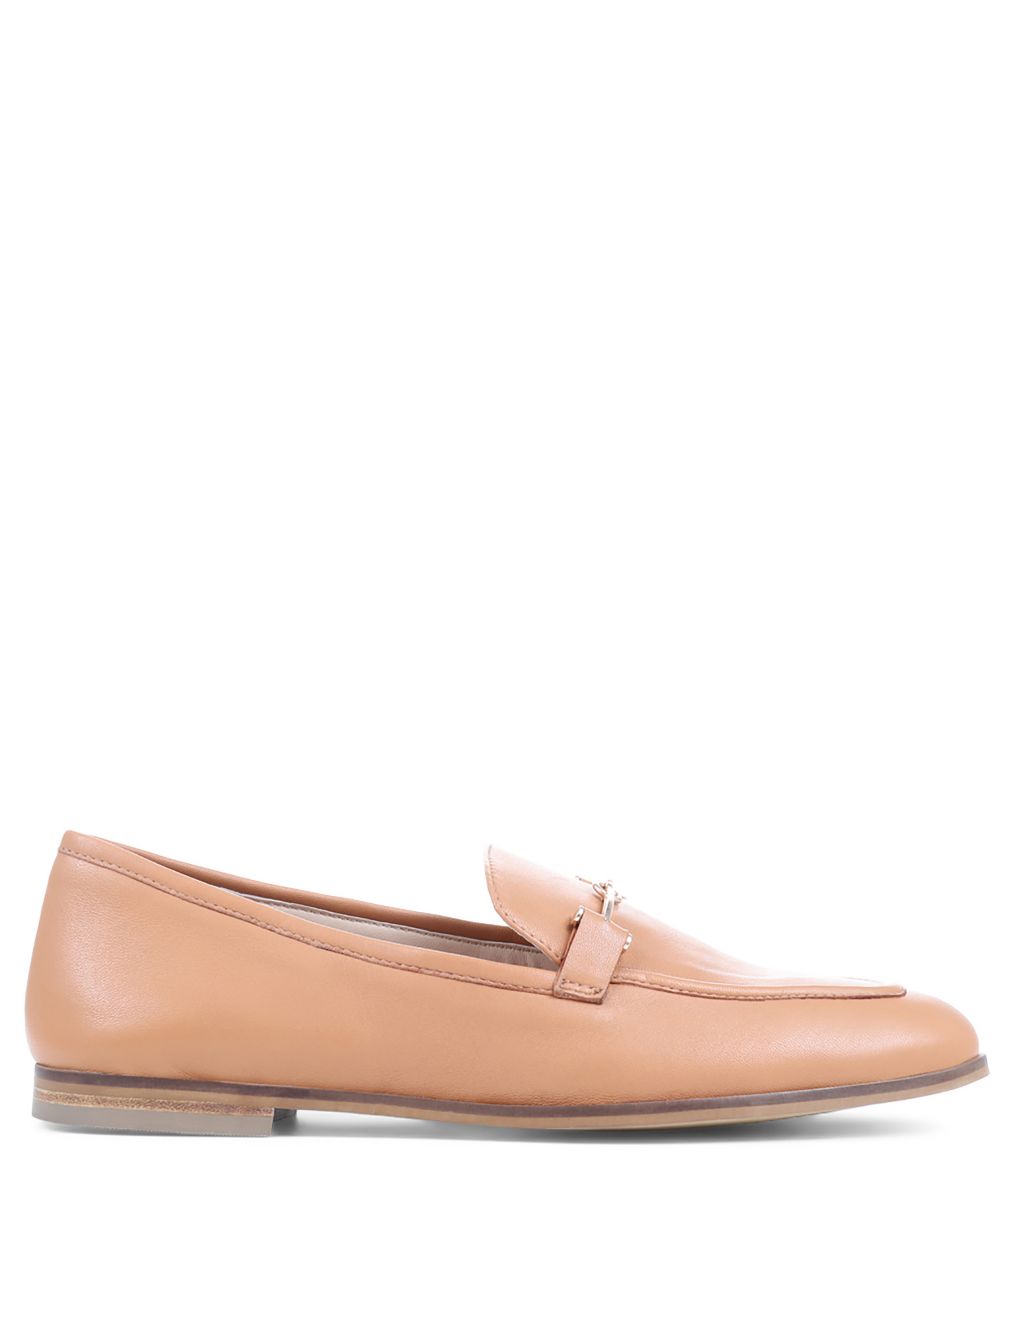 Leather Slip On Bar Flat Loafers image 2